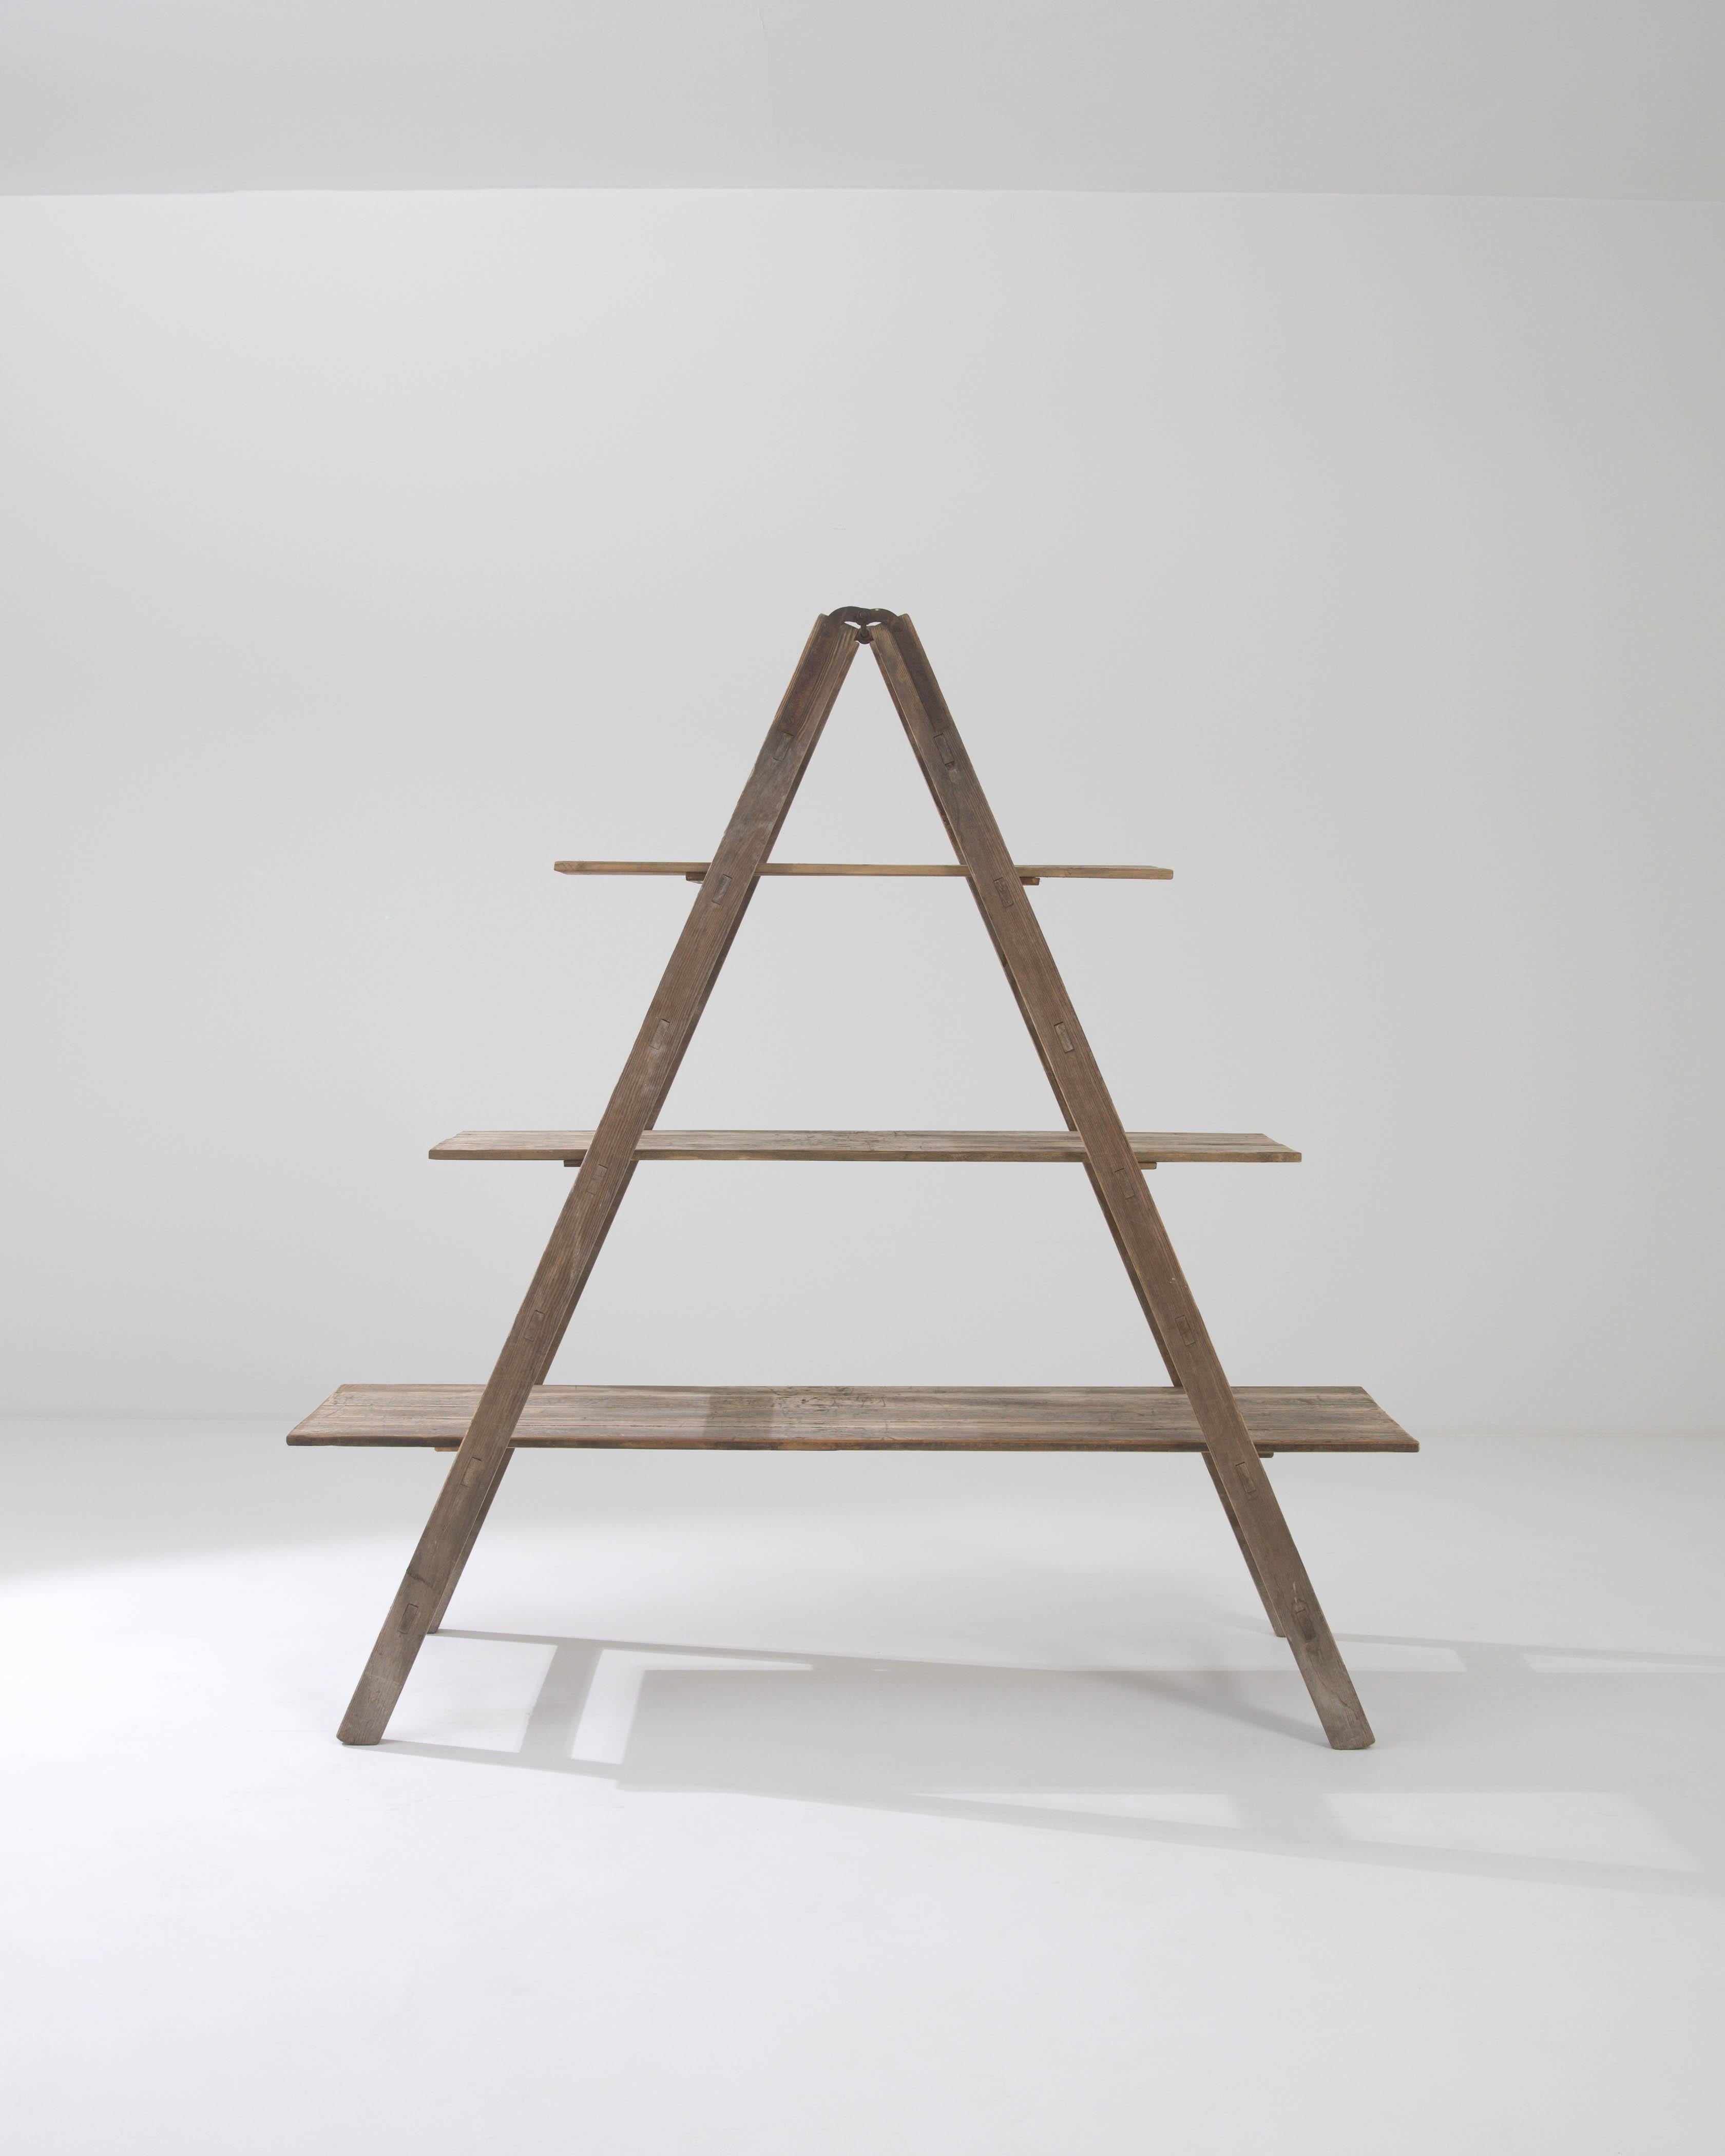 A wooden shelving unit made in 20th century, France. This shelving unit is composed with a vintage fruit picking ladder teepeed together with slats of wood fit across its rungs, forming three shelves. A pleasing triangular structure, this elegant